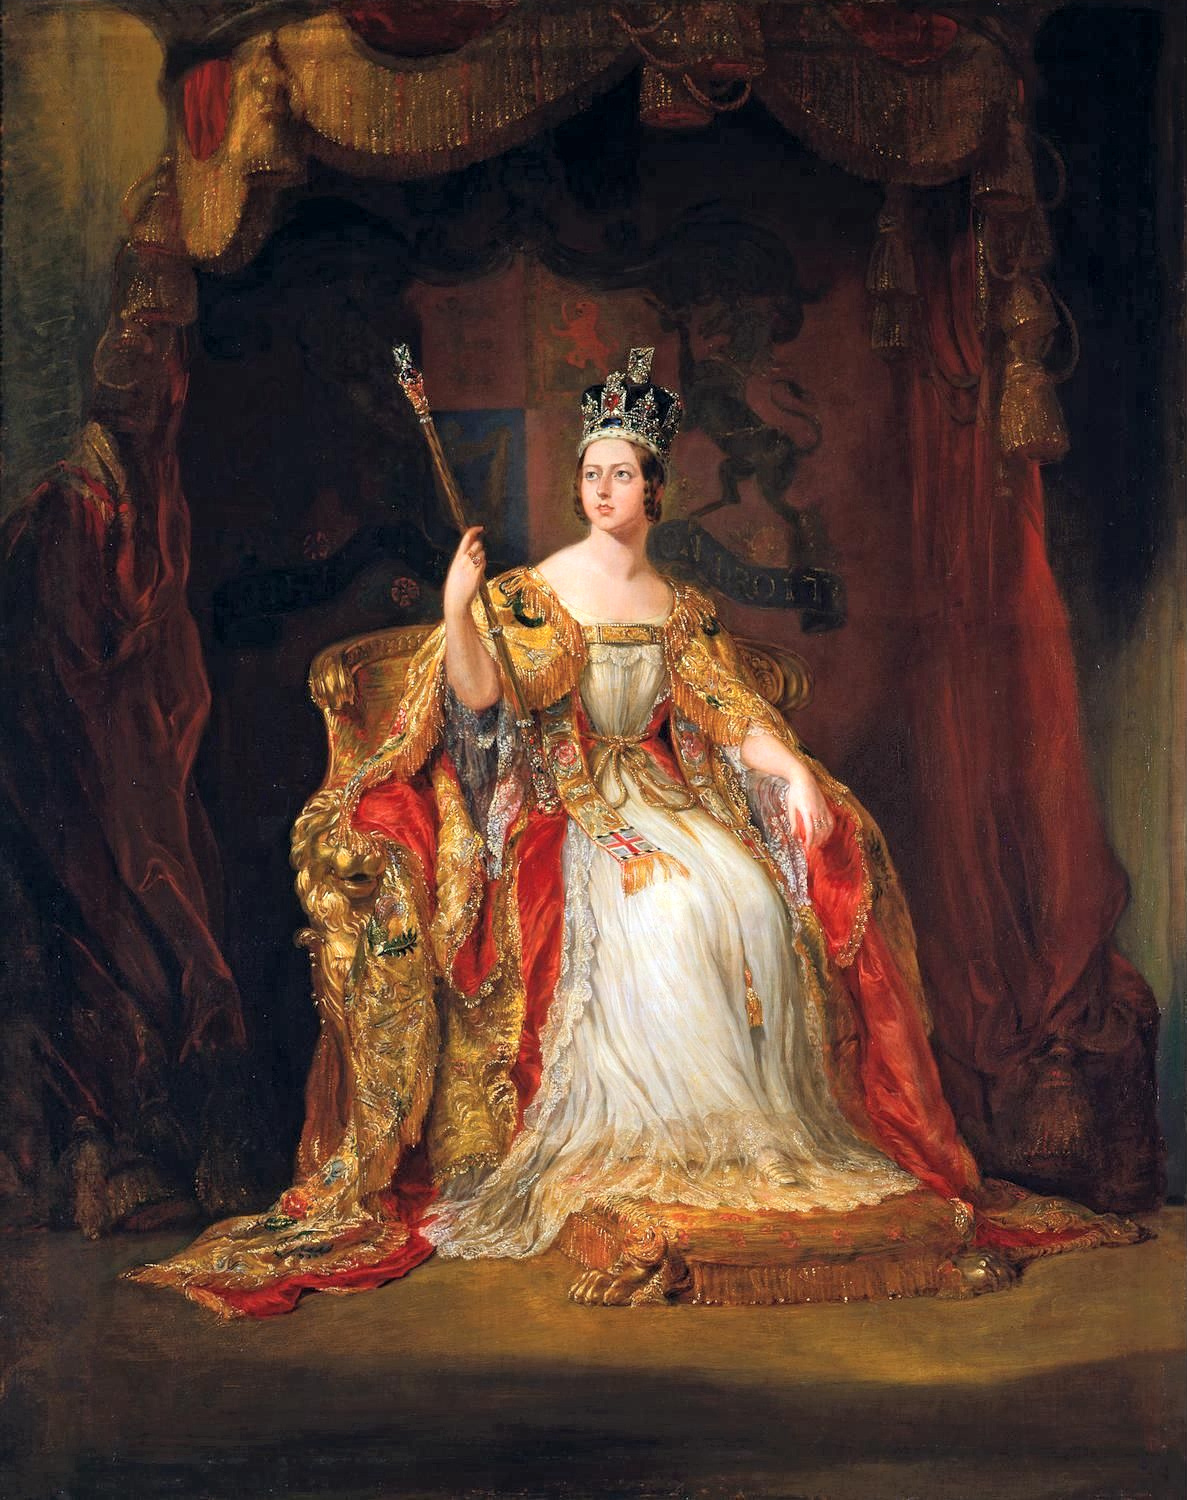 Coronation Portrait of Queen Victoria by Sir George Hayter, 1838. Royal Collection of the United Kingdom. No known copyright